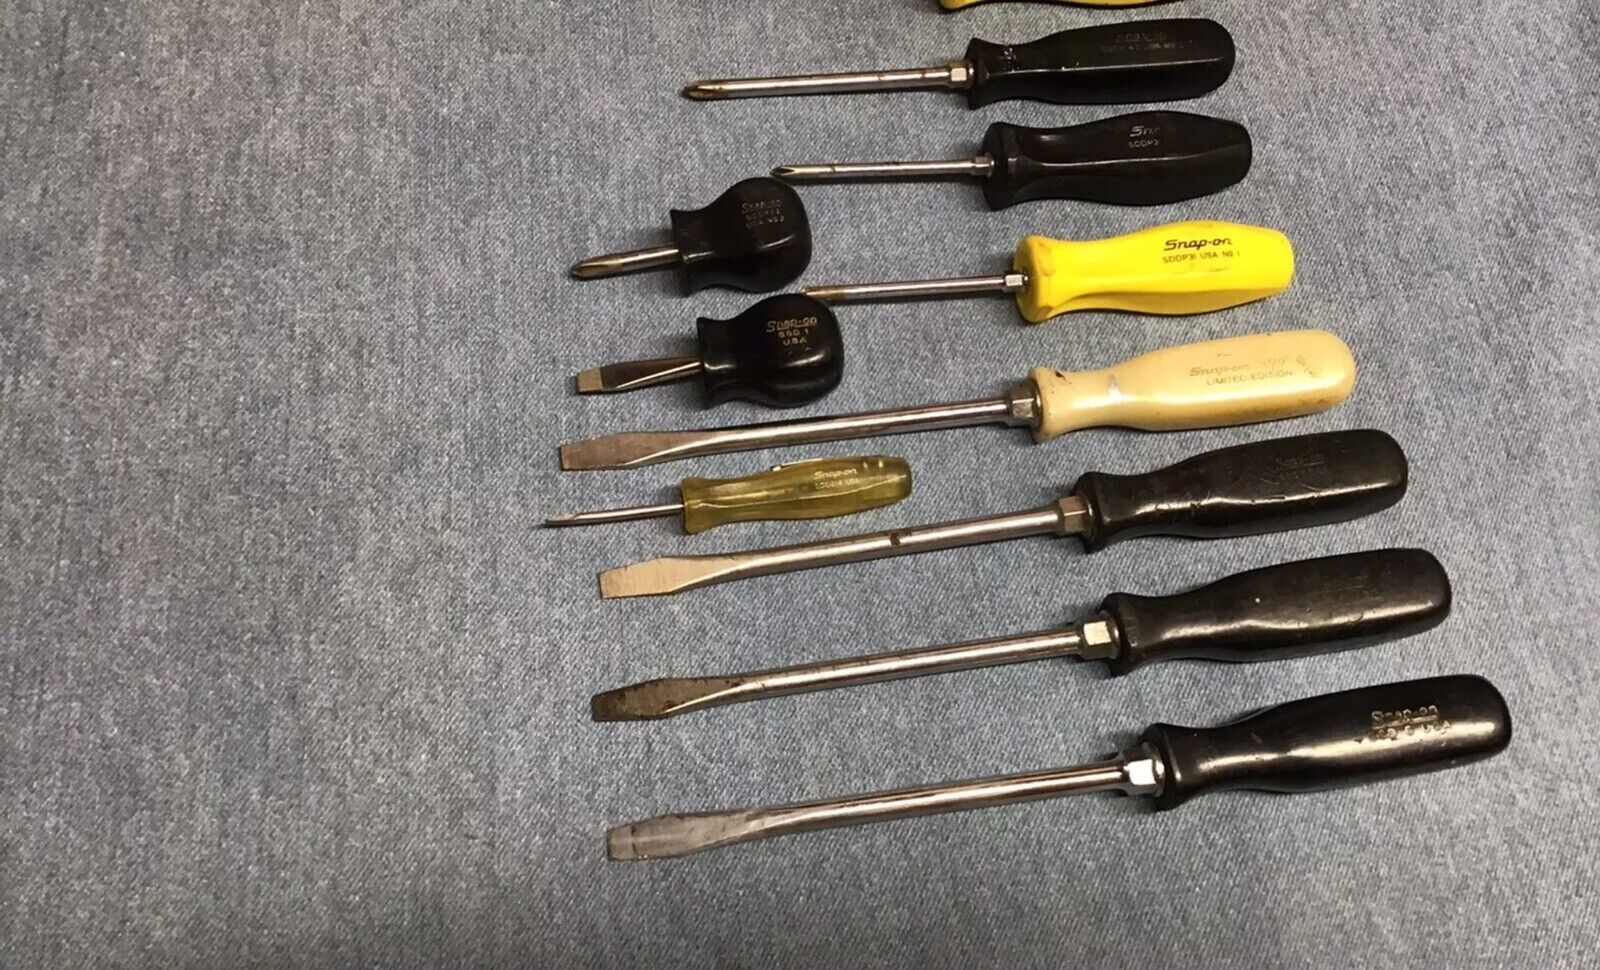 Used Snap On Free shipping New Screwdrivers Lot of Slotte Tools Ranking TOP8 10 4 6 Phillips